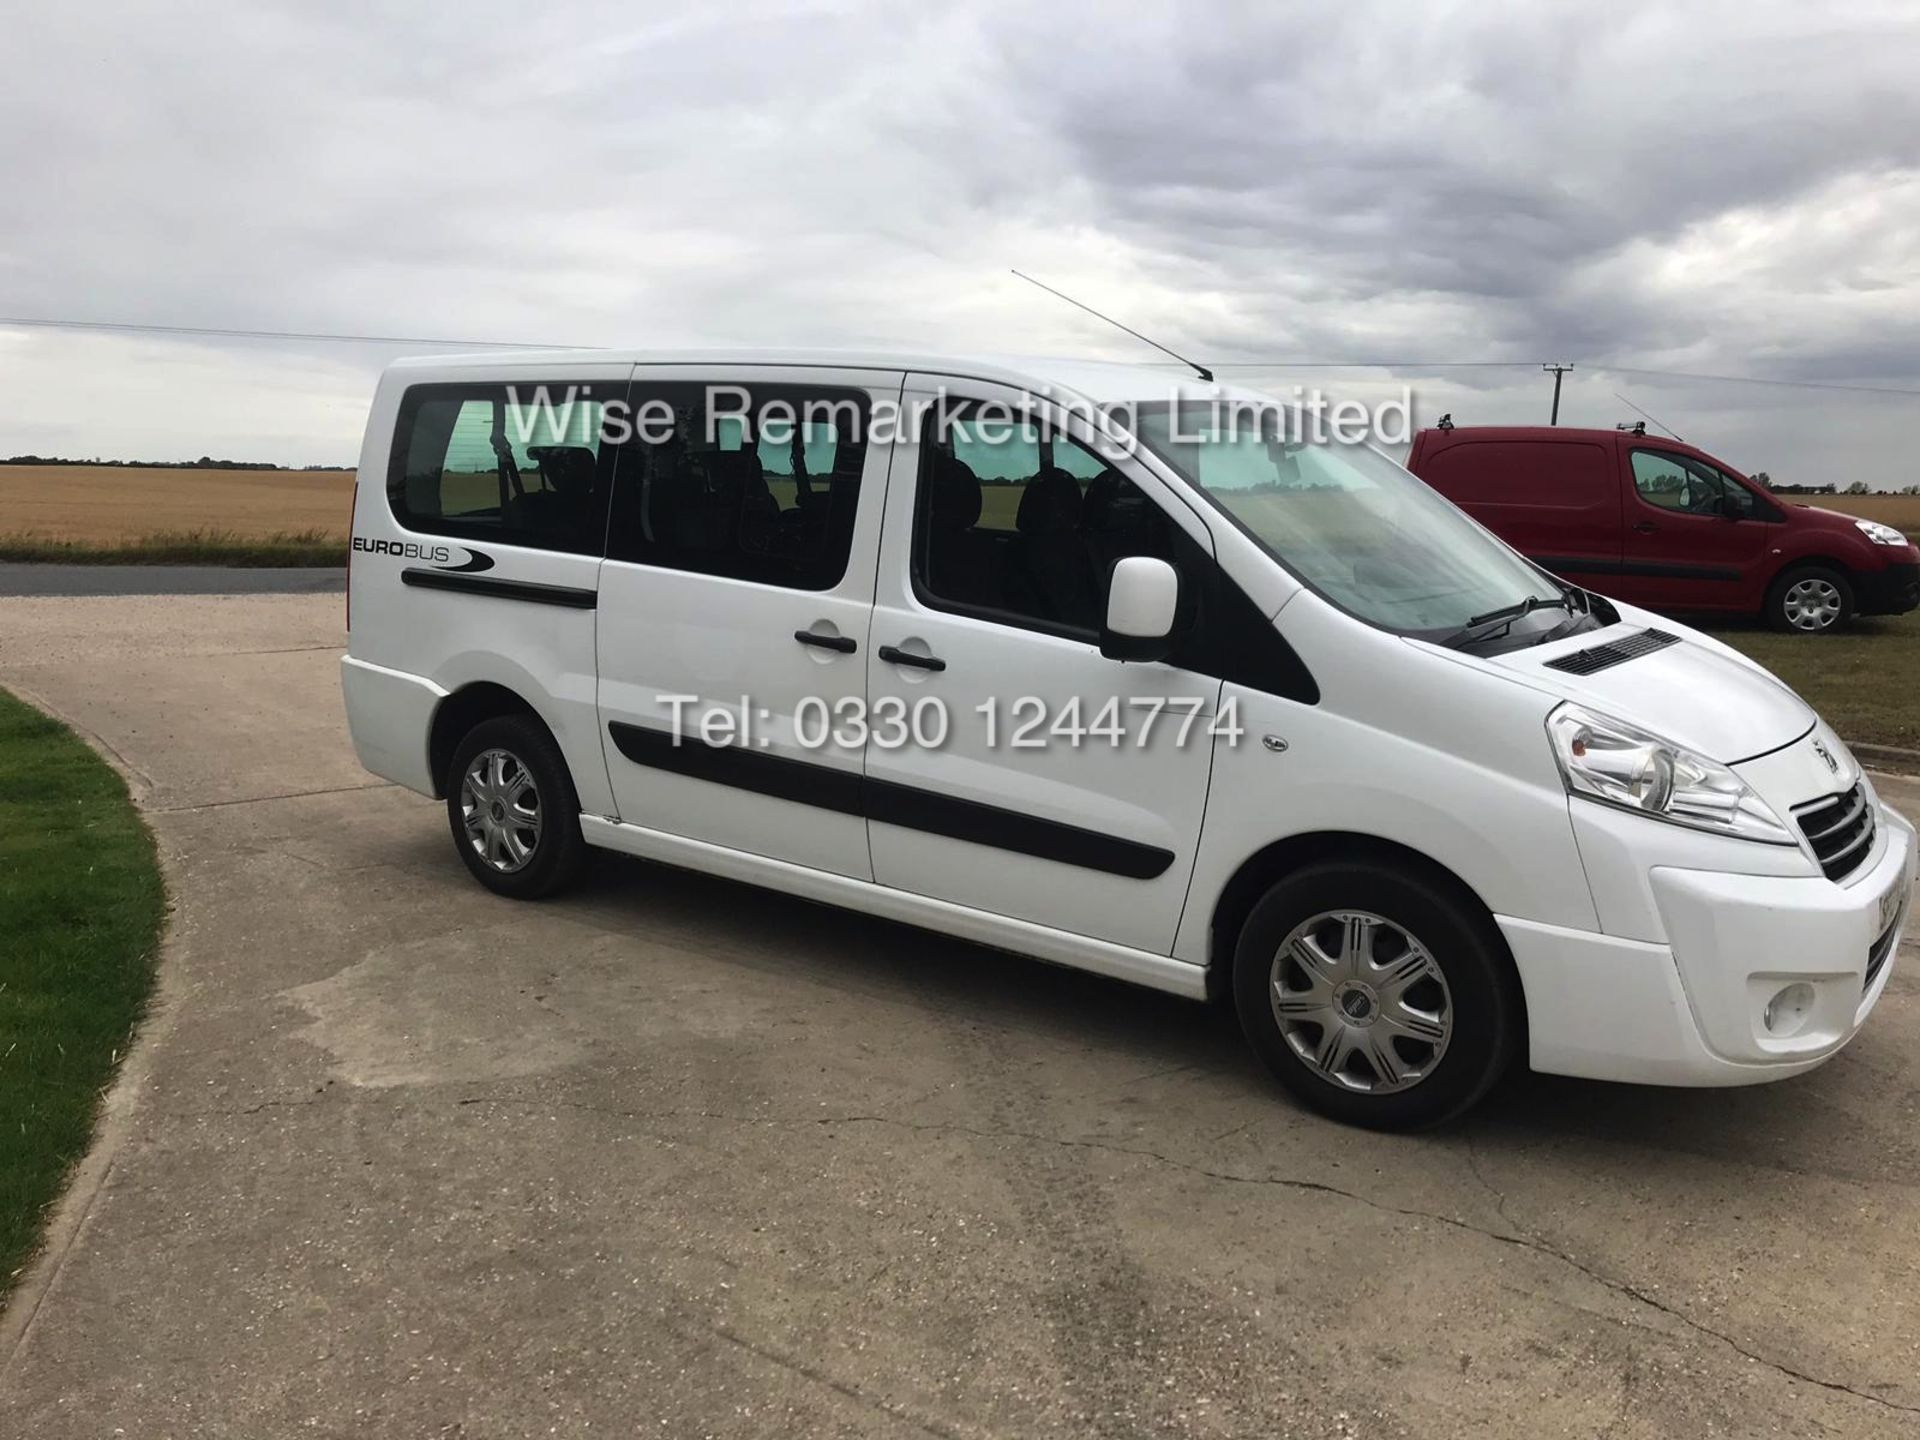 PEUGEOT EUROBUS S *MPV 8 SEATER* 2.0l (2013 - 13 REG) **AIR CON** - 1 OWNER FROM NEW - Image 2 of 19